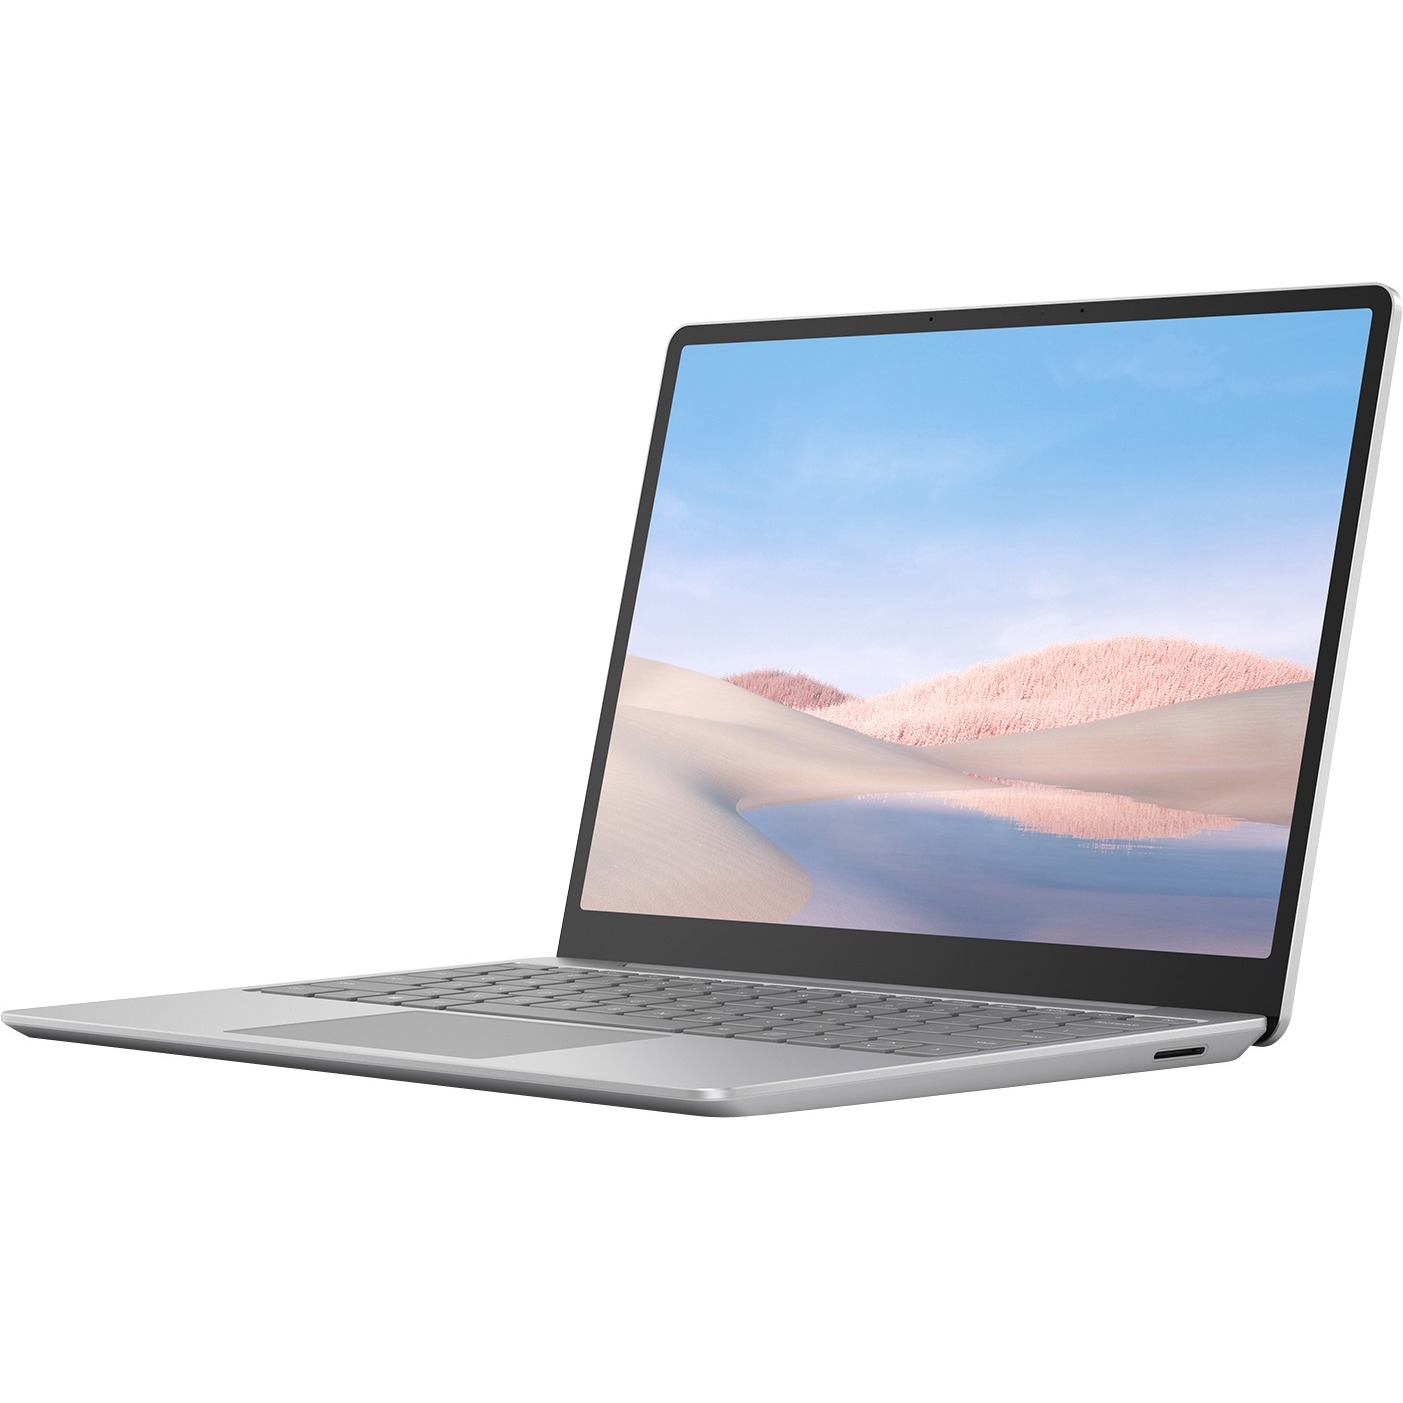 Microsoft Surface Laptop GO 1ZO-00001 12.4" Touch Notebook Intel Core i5 4GB Memory 64GB eMMC - image 2 of 3